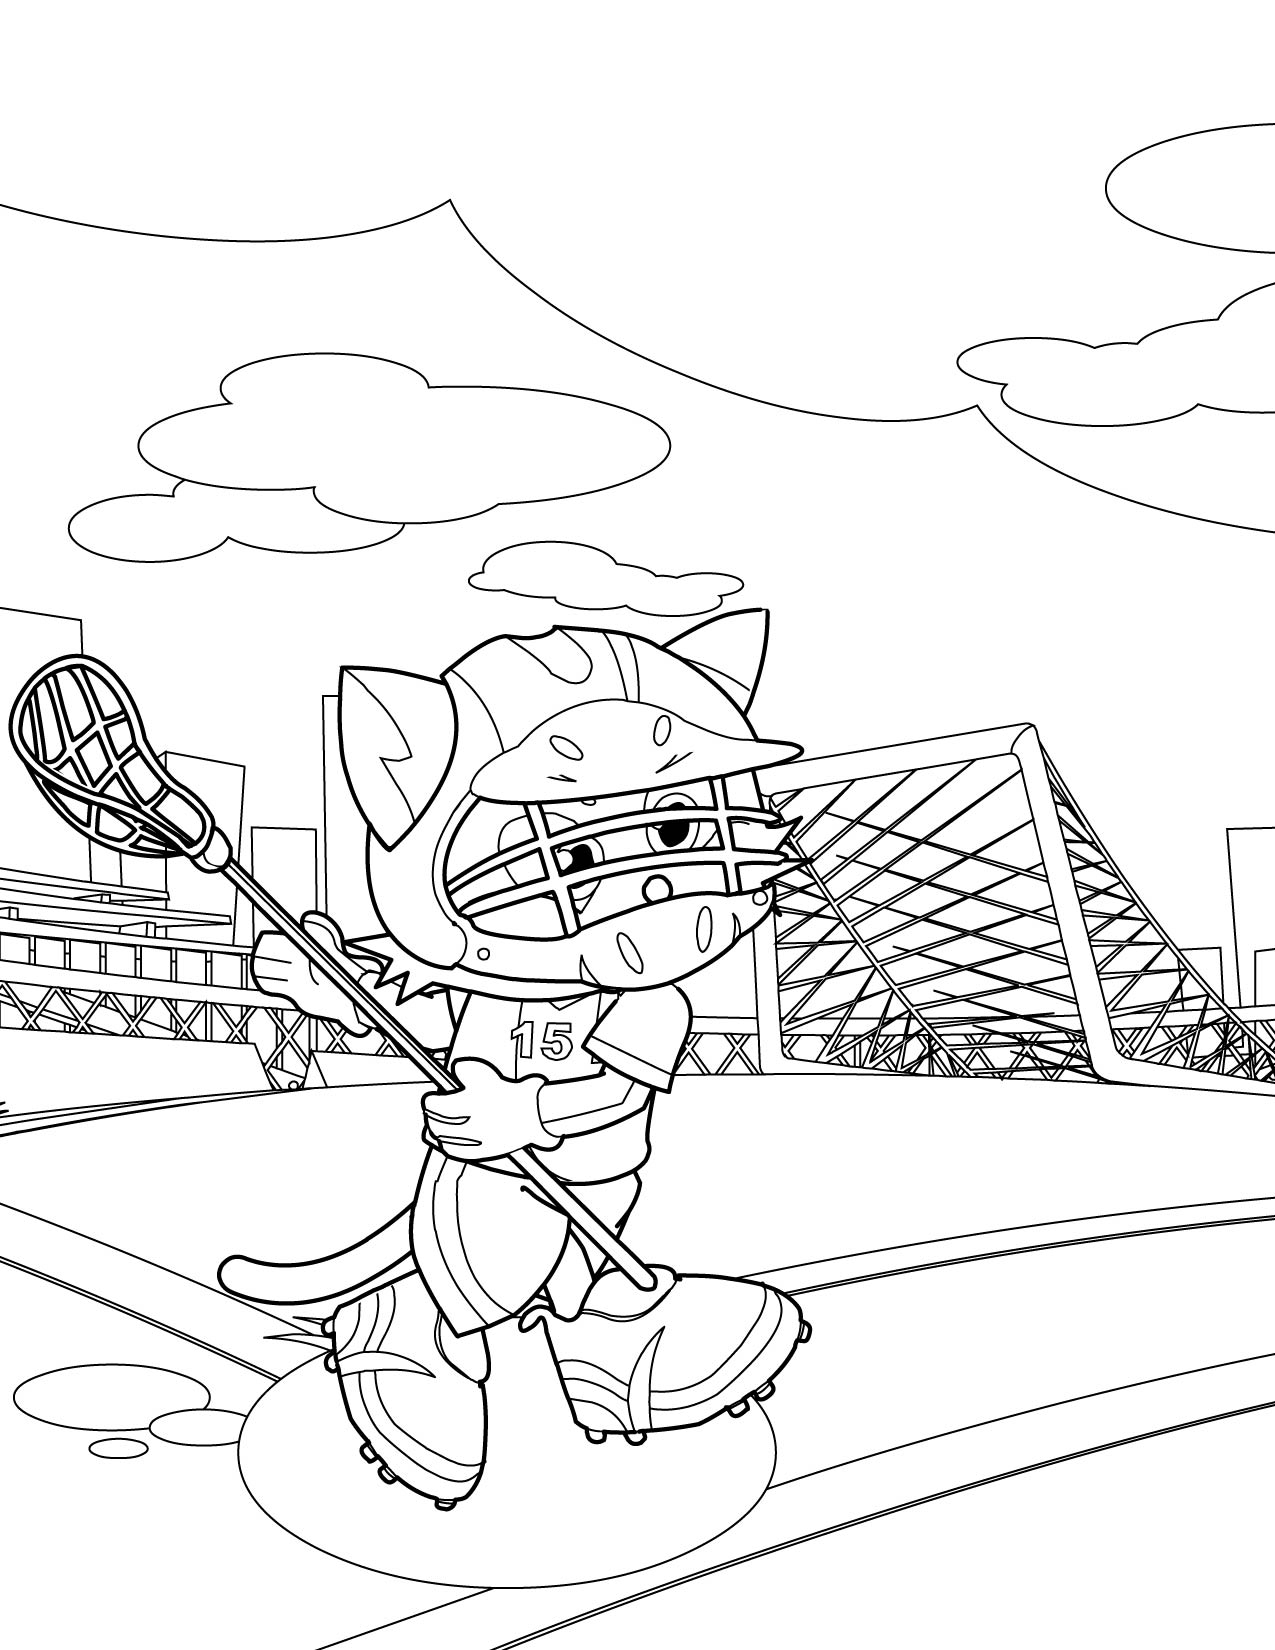 New Lacrosse Coloring Pages for Adult